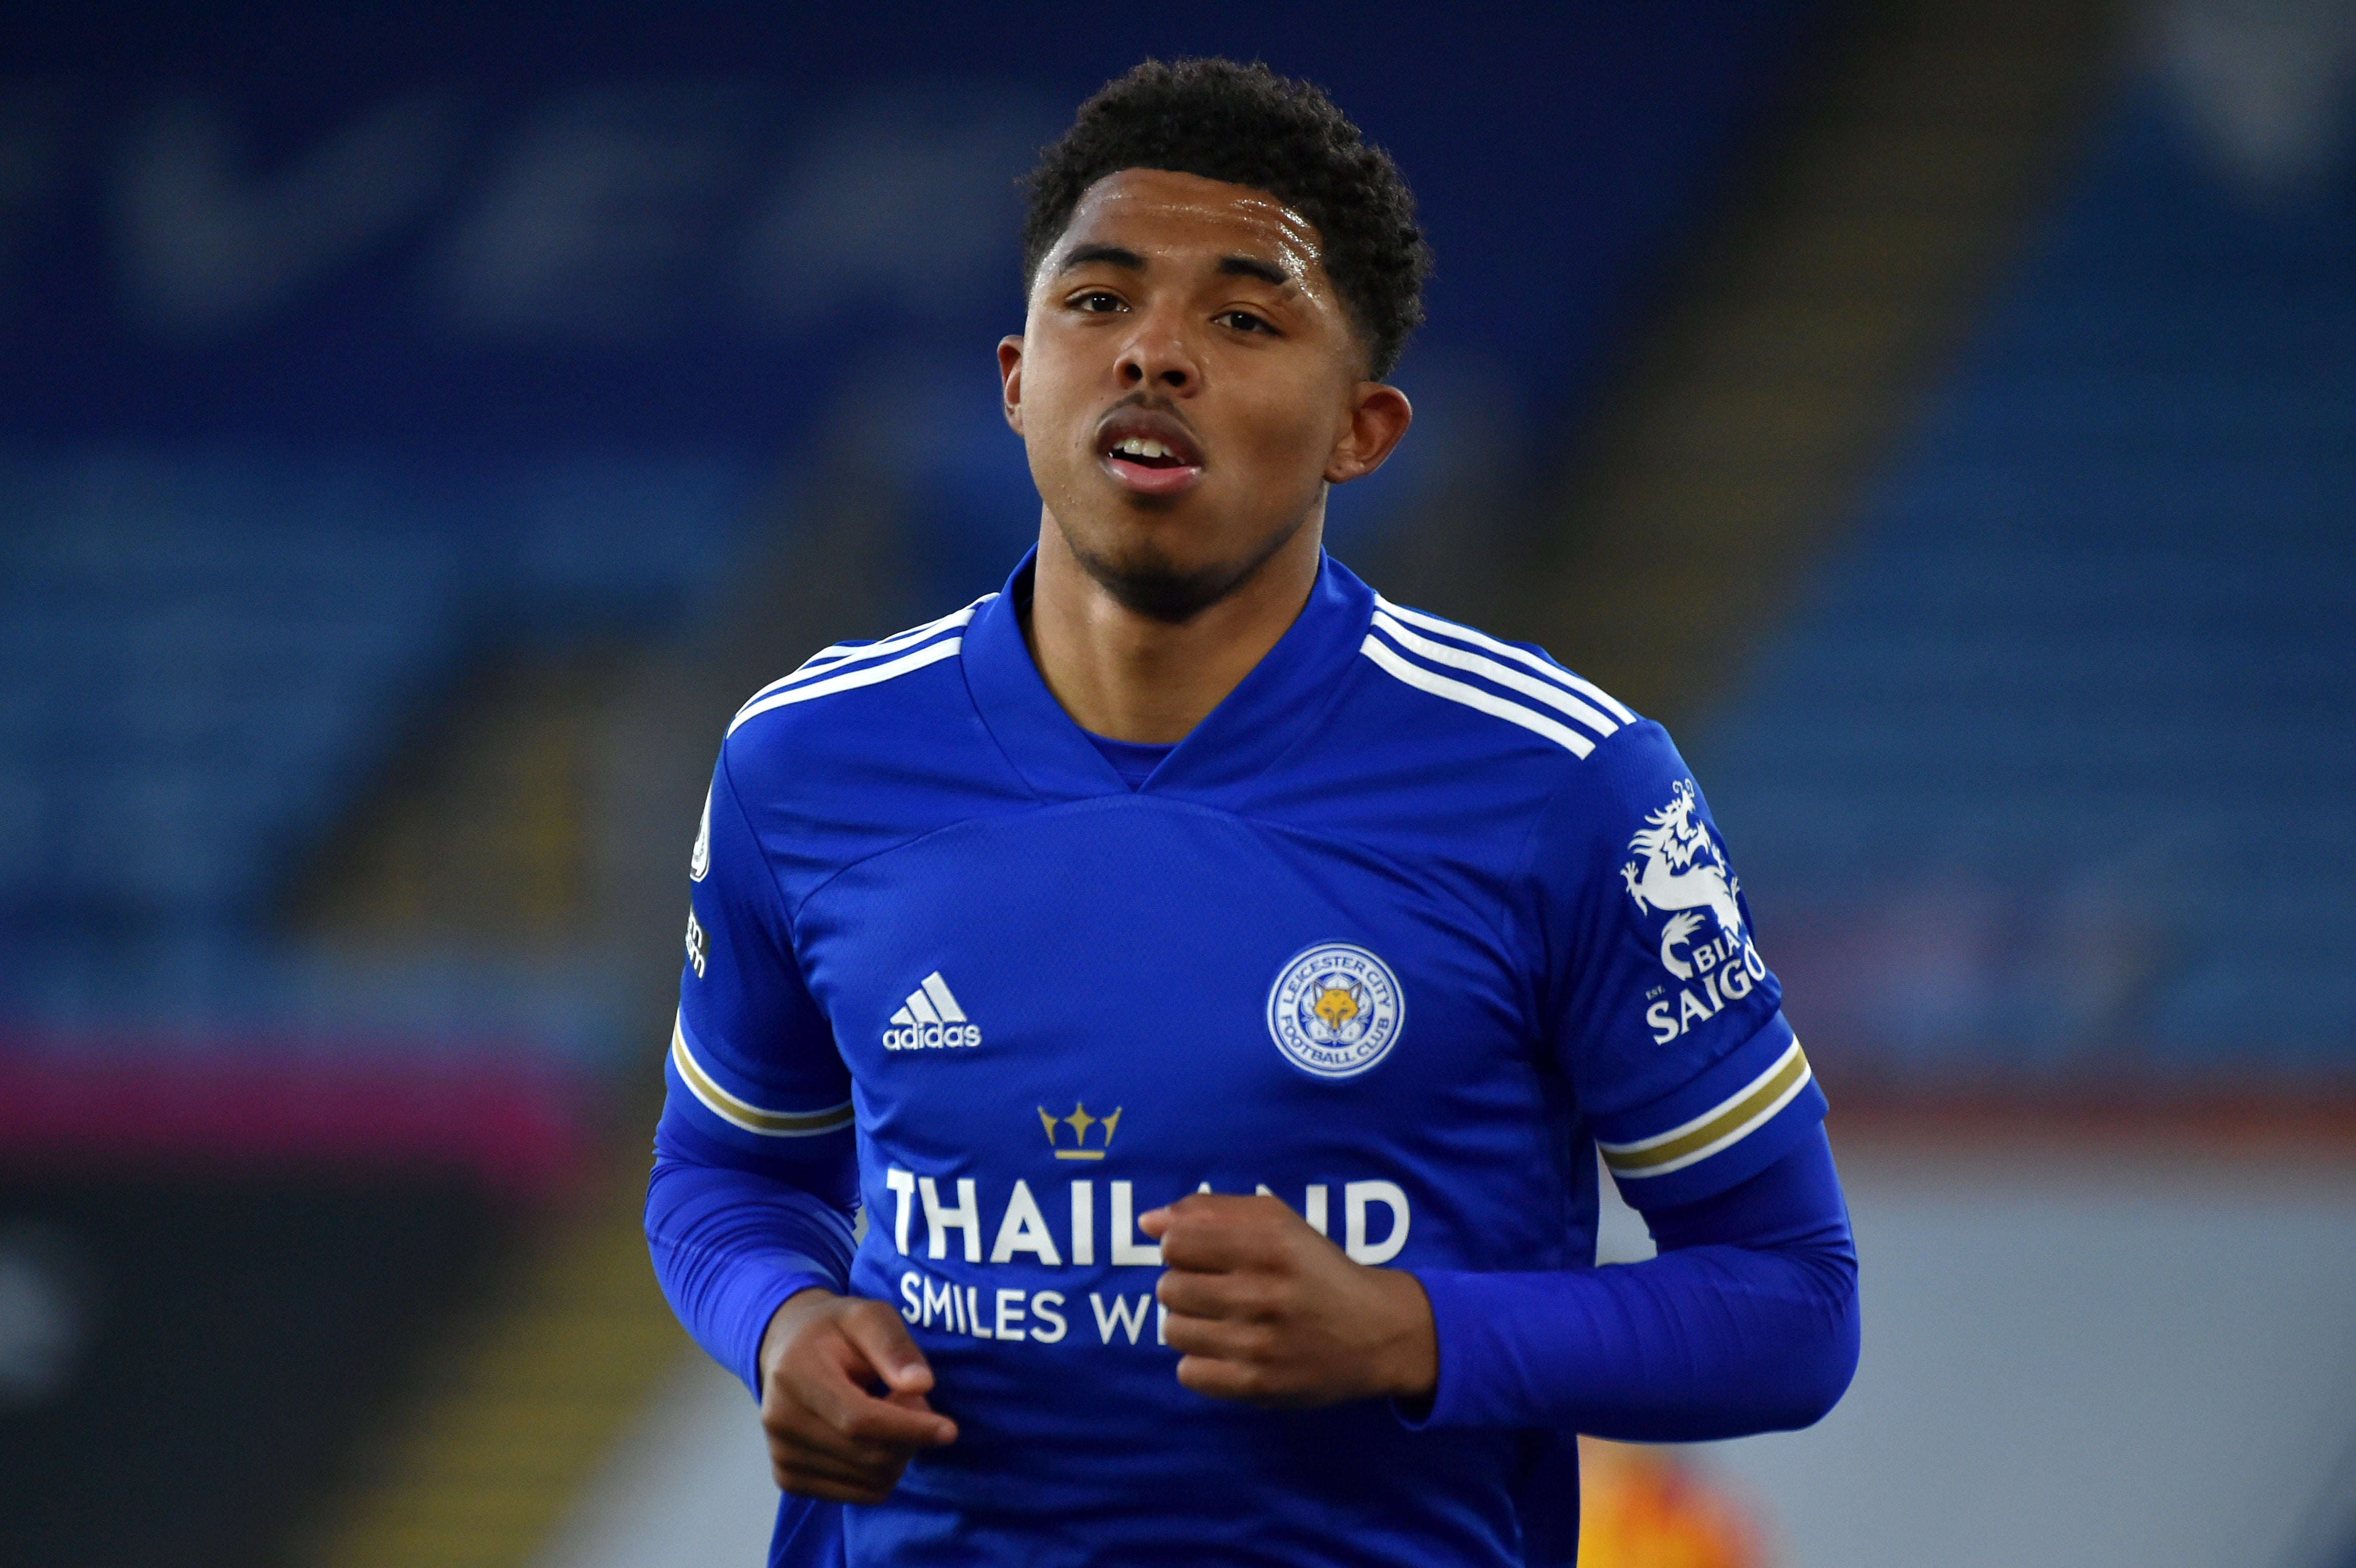 Manchester United transfer news: Wesley Fofana ‘keen on move’ as Chelsea ‘resume talks’ for Leicester star